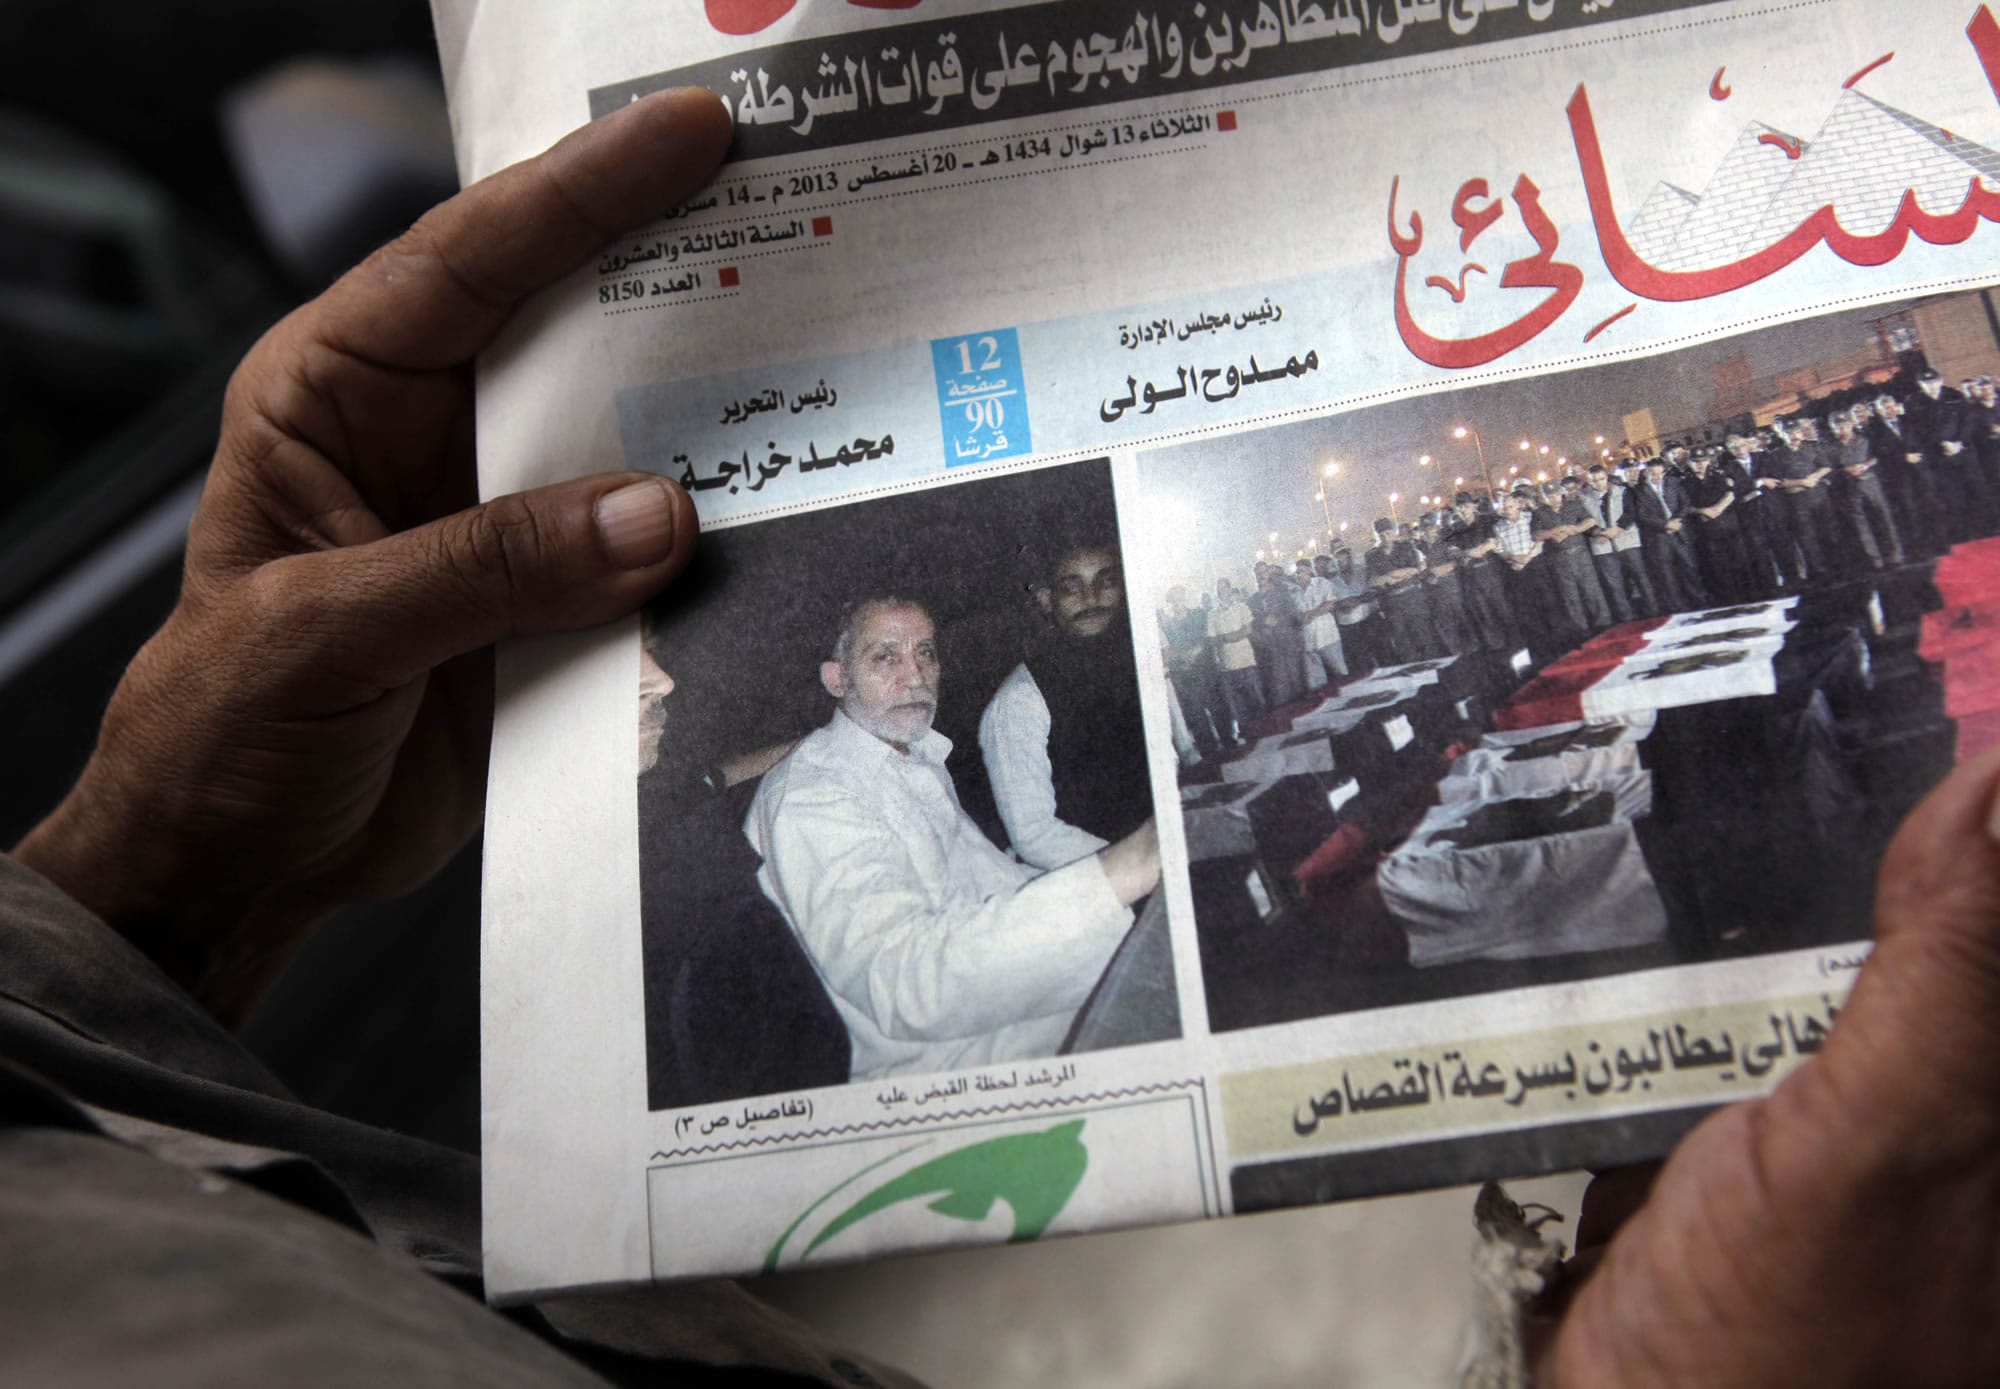 An Egyptian holds Al-Ahram newspaper in Cairo, Egypt, on Tuesday fronted by a picture of Mohammed Badie, the supreme leader of the Muslim Brotherhood, left, and pictures of flag-draped coffins containing the bodies of slain off-duty policemen in North Sinai.